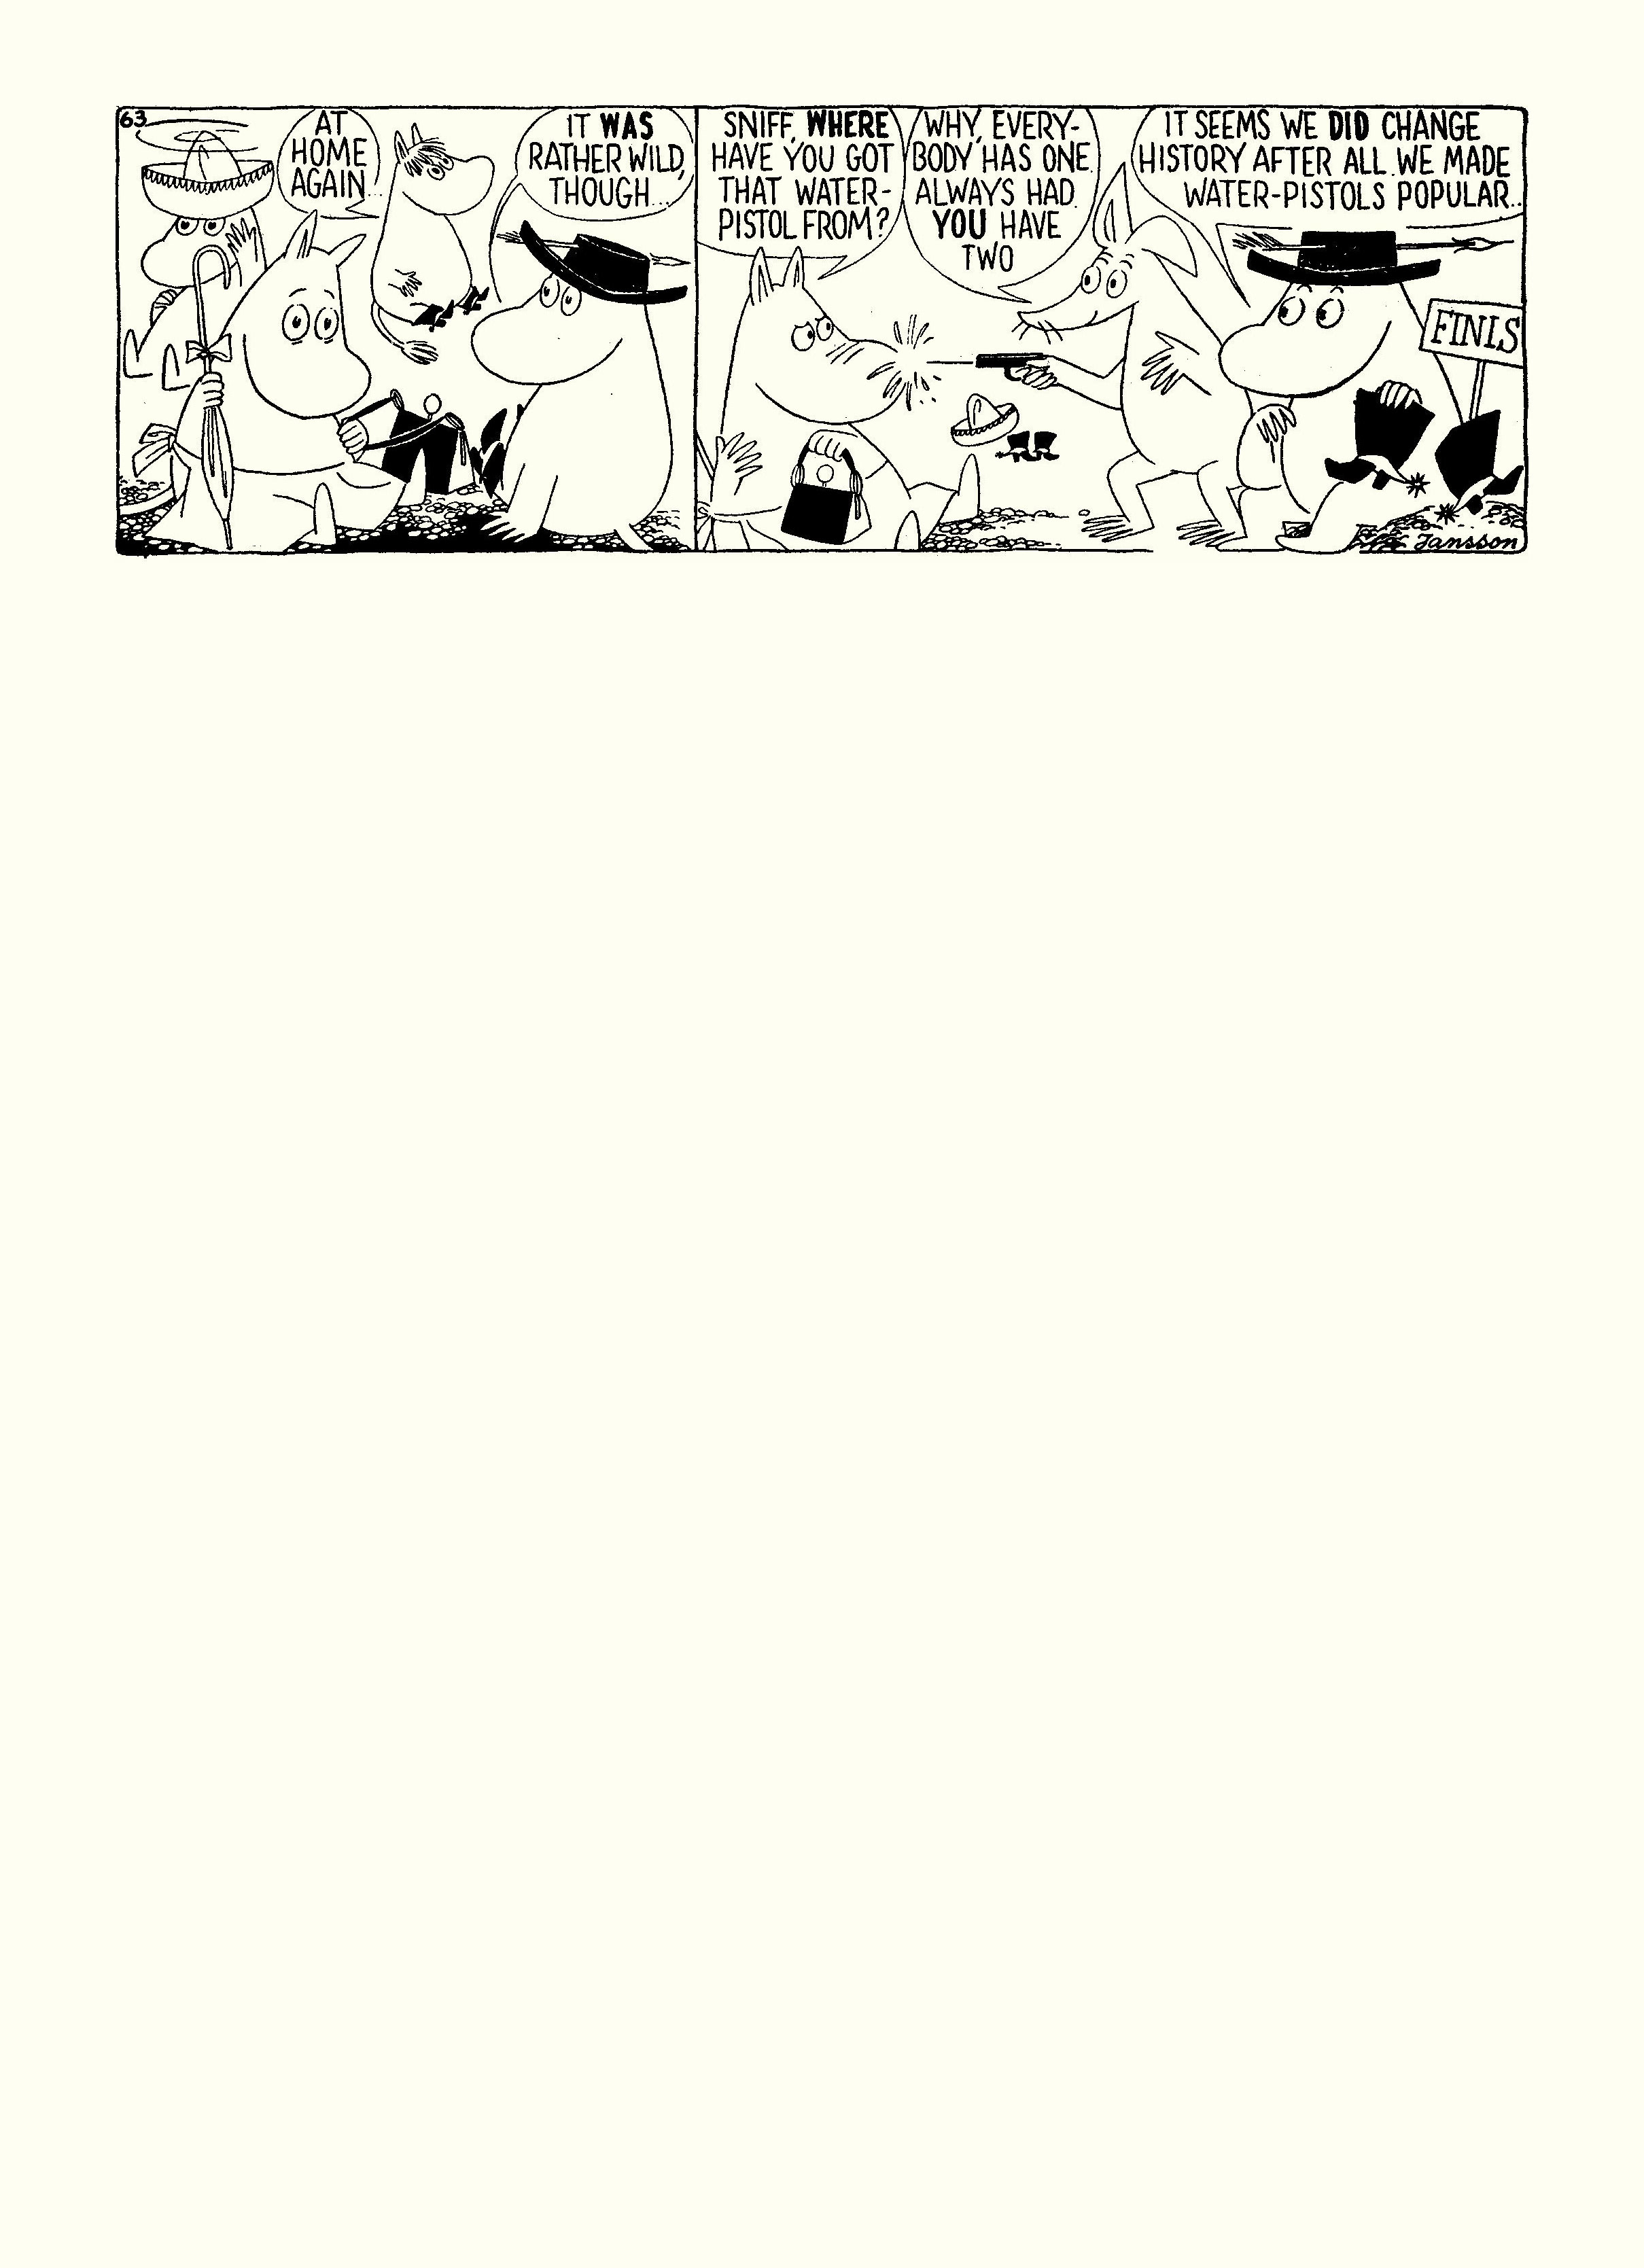 Read online Moomin: The Complete Tove Jansson Comic Strip comic -  Issue # TPB 4 - 22